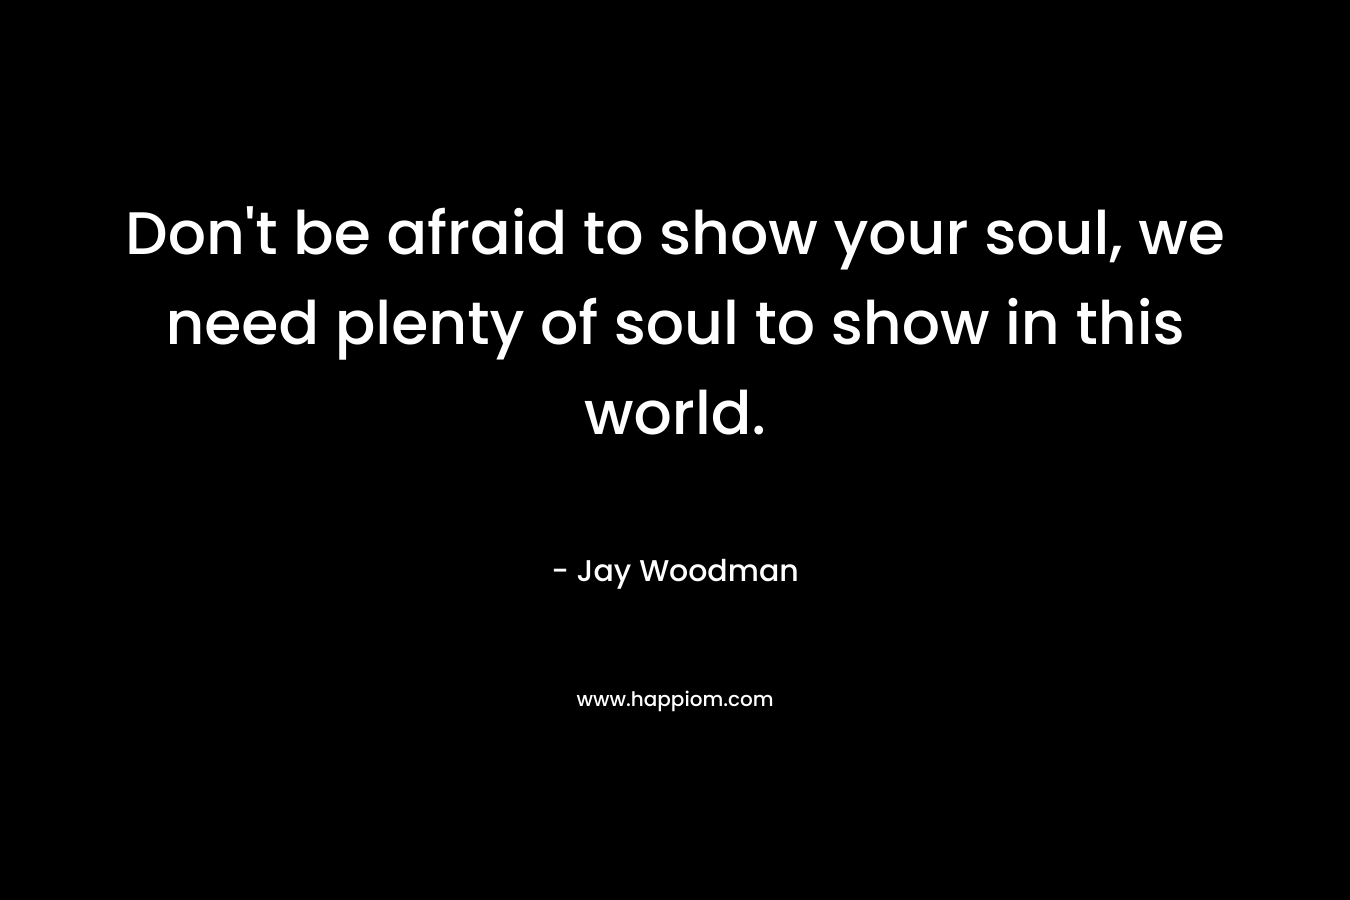 Don't be afraid to show your soul, we need plenty of soul to show in this world.